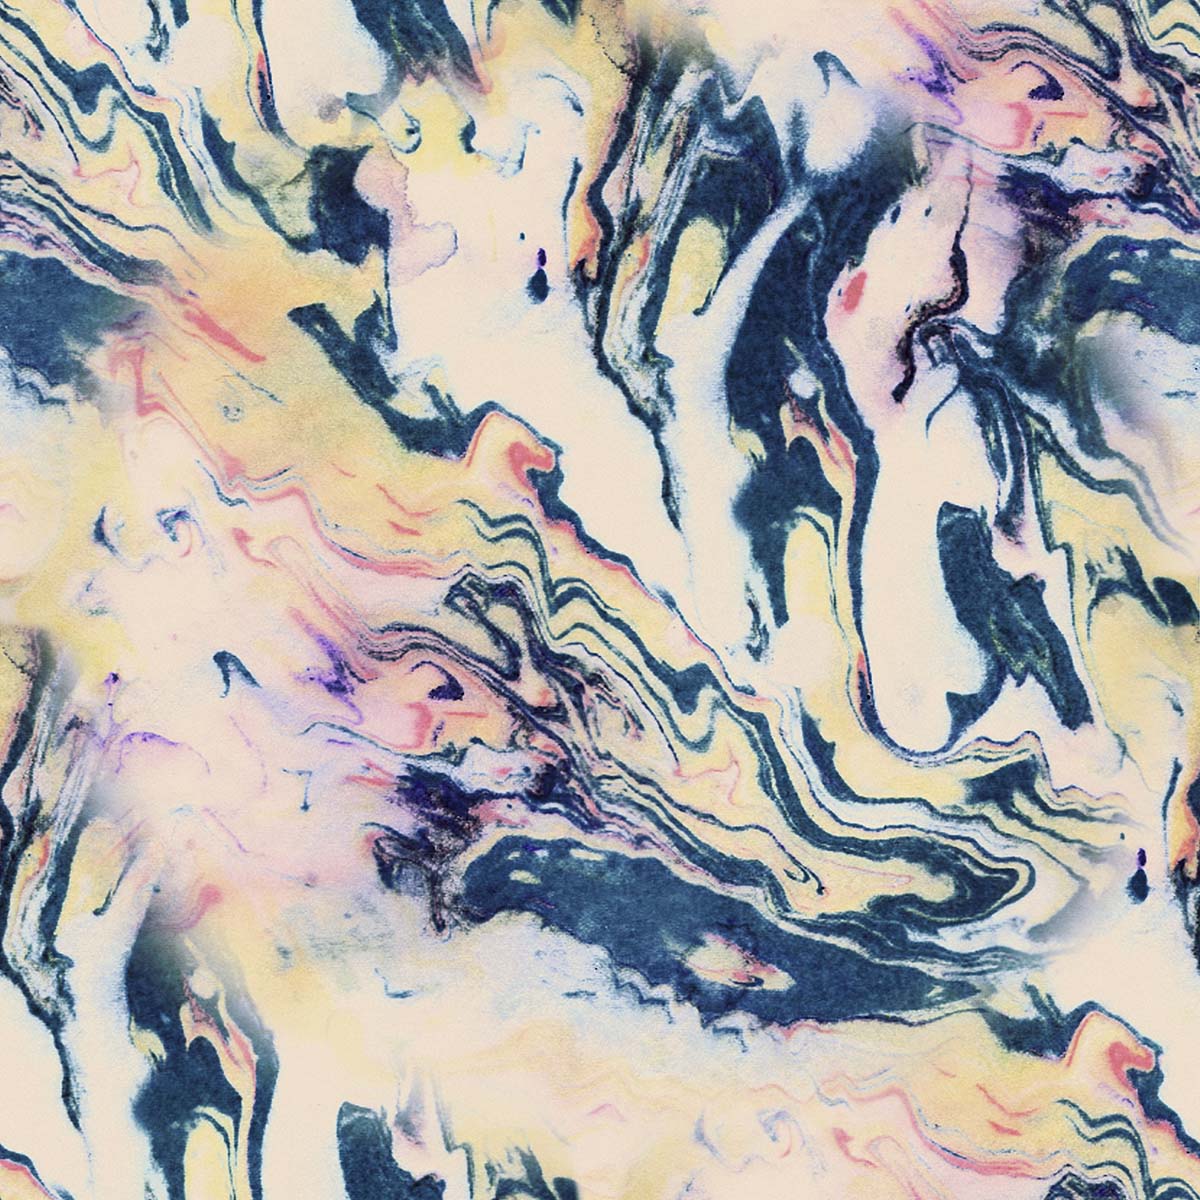 A colorful swirls on paper